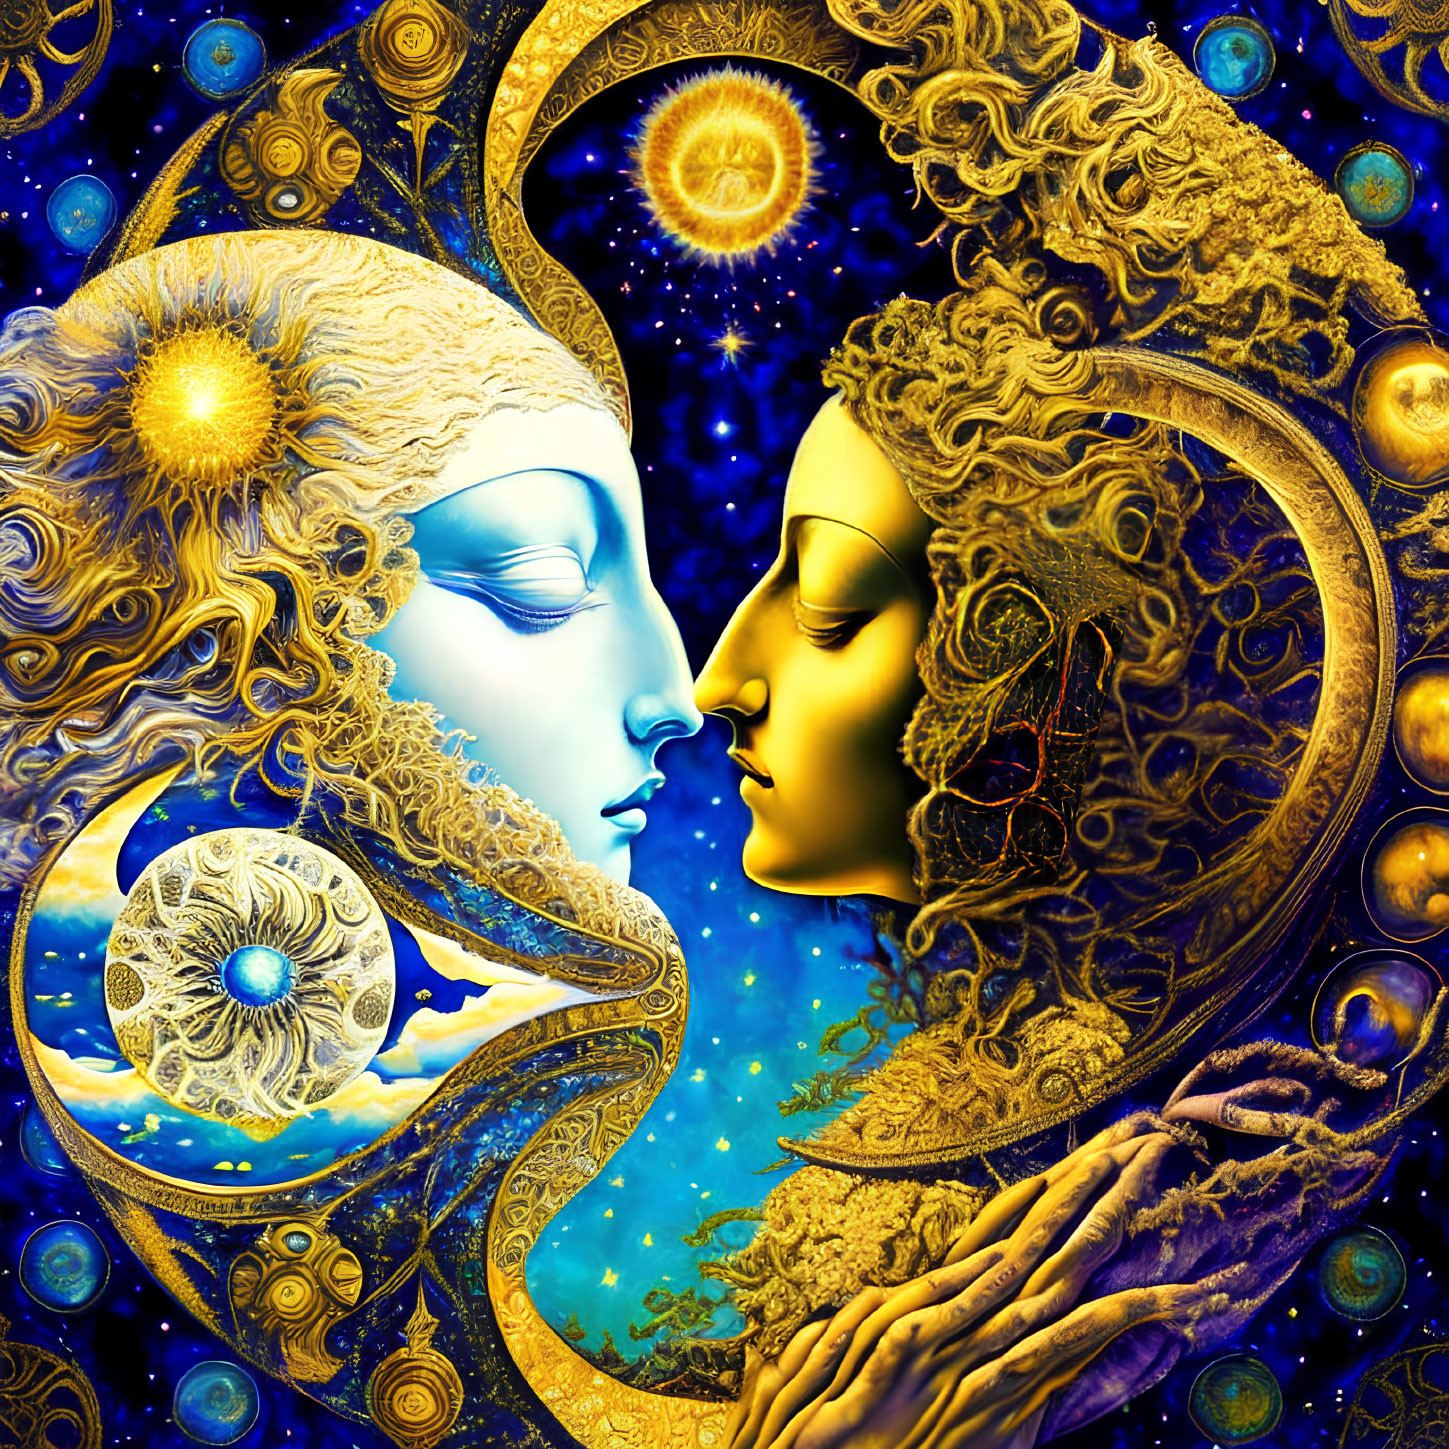 Ornate celestial and oceanic faces on vivid blue background